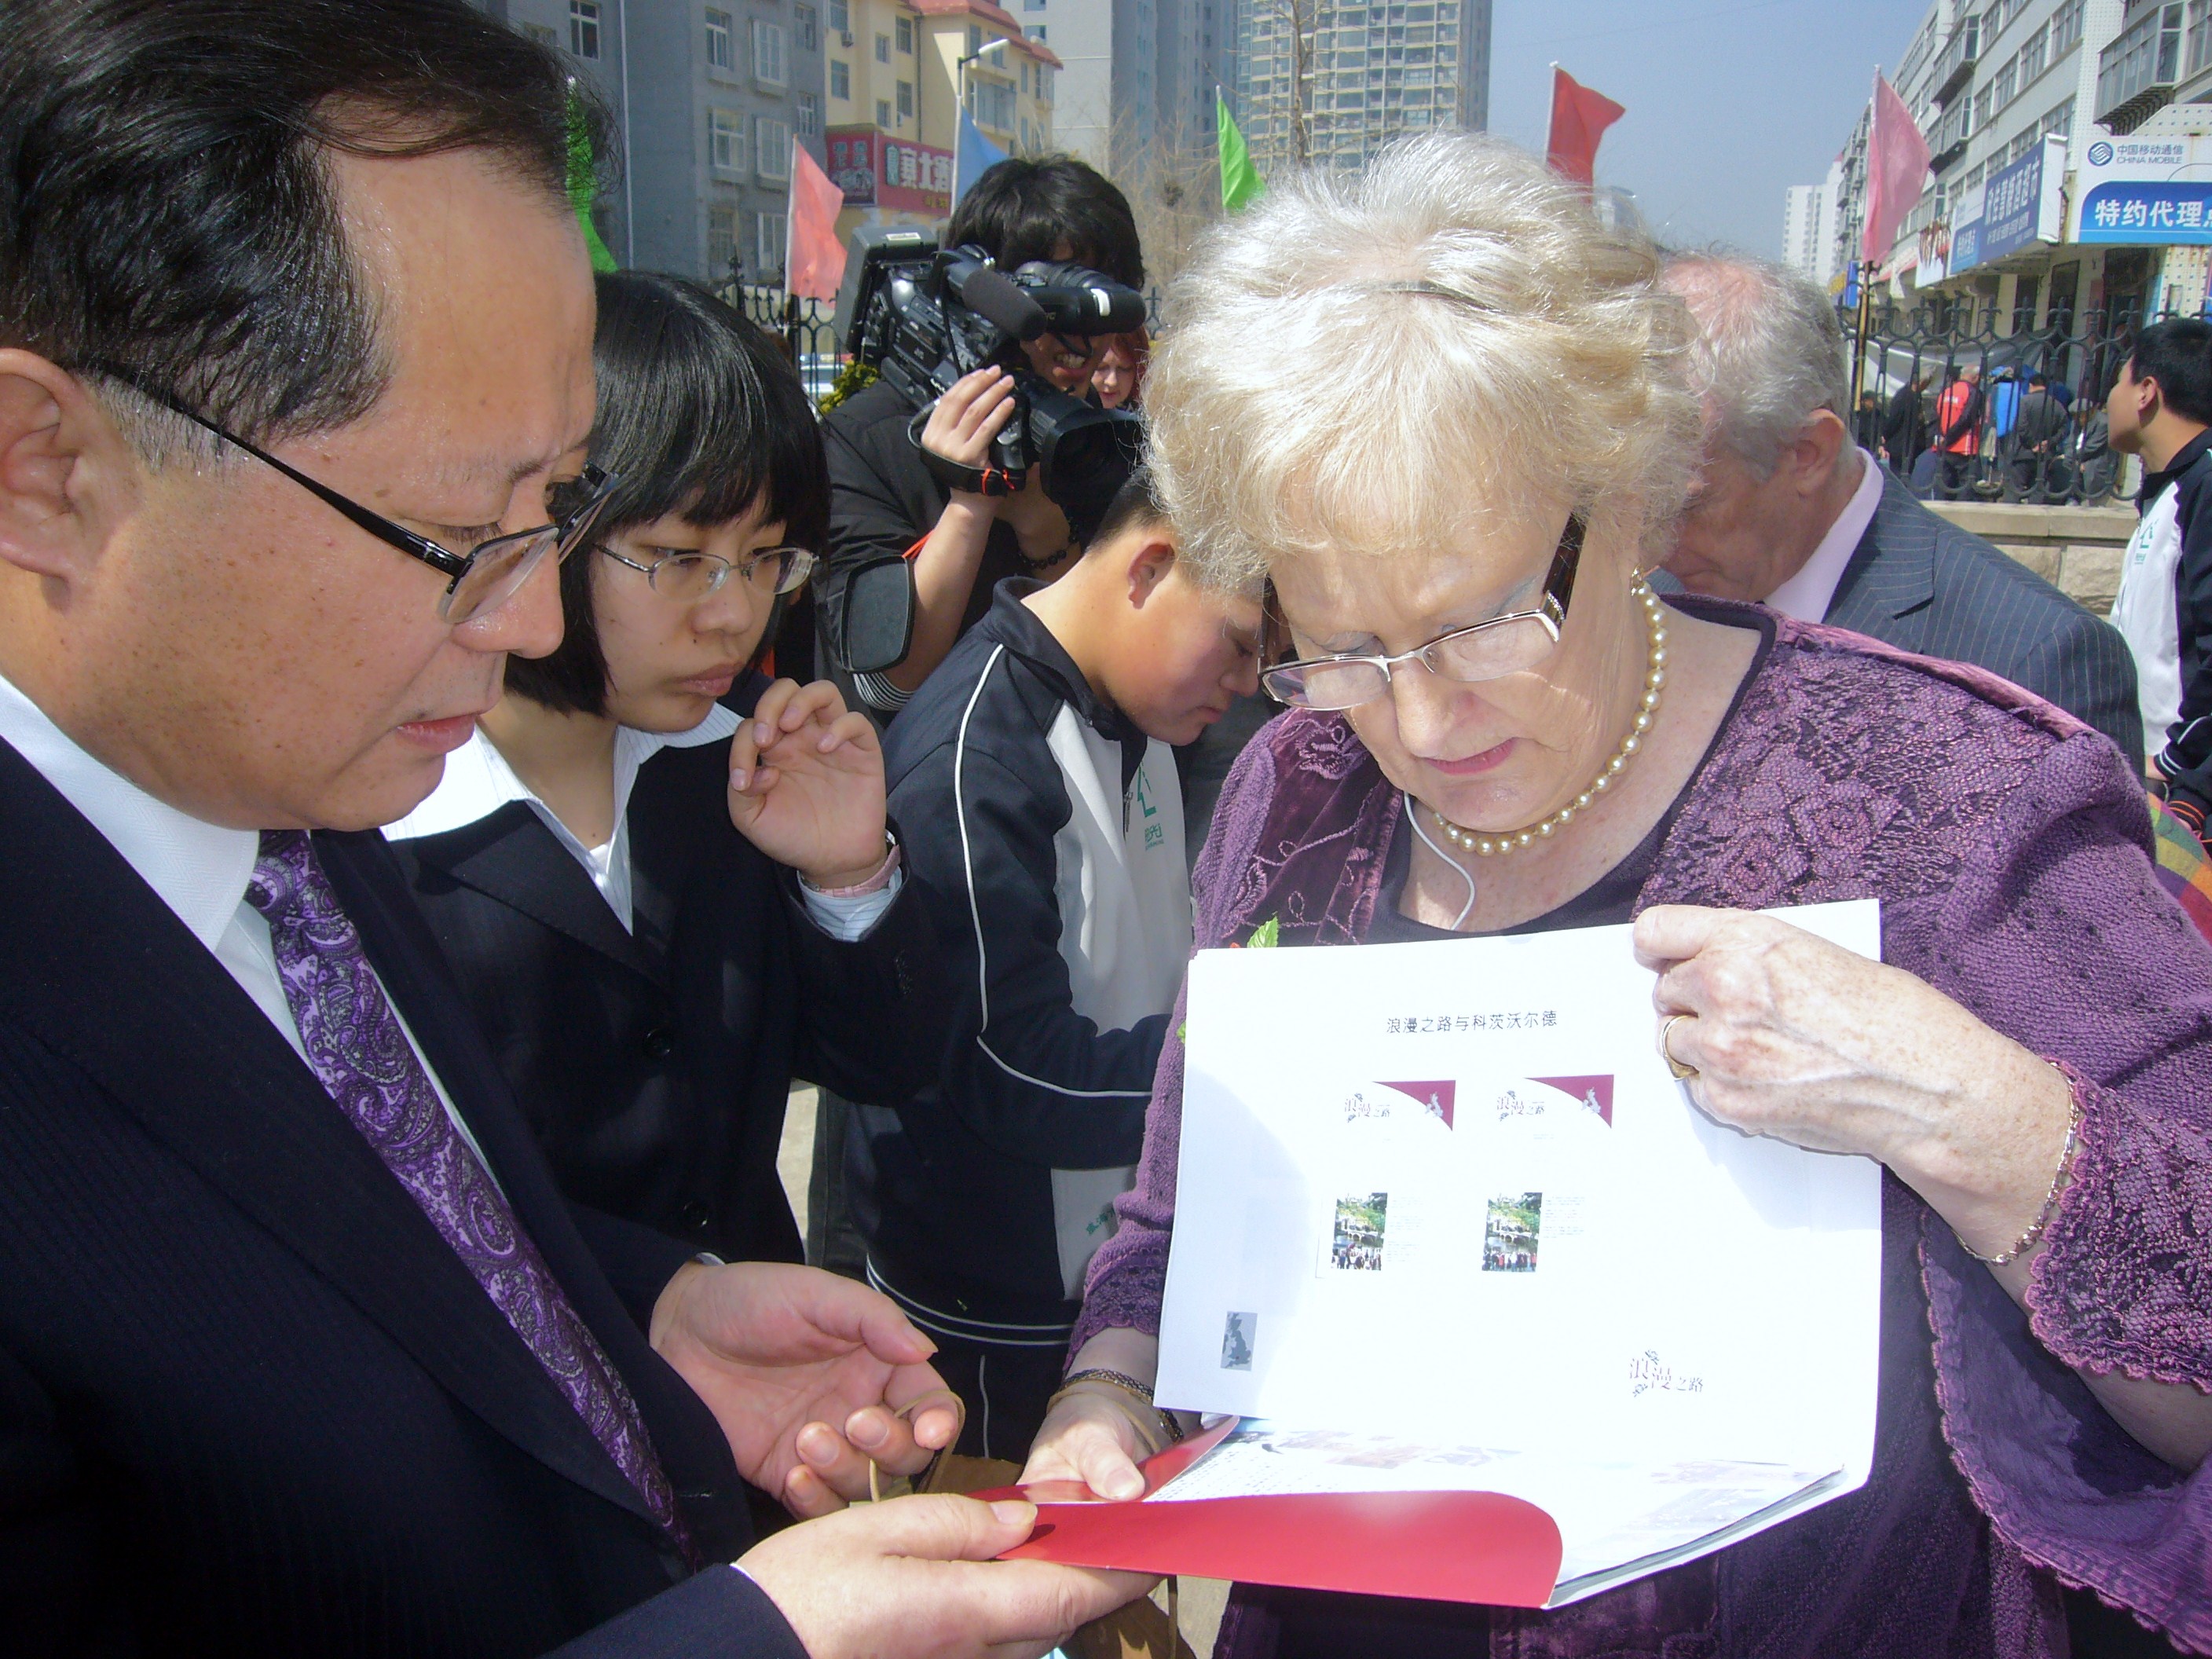 Mayor with Weihai official - April 2012